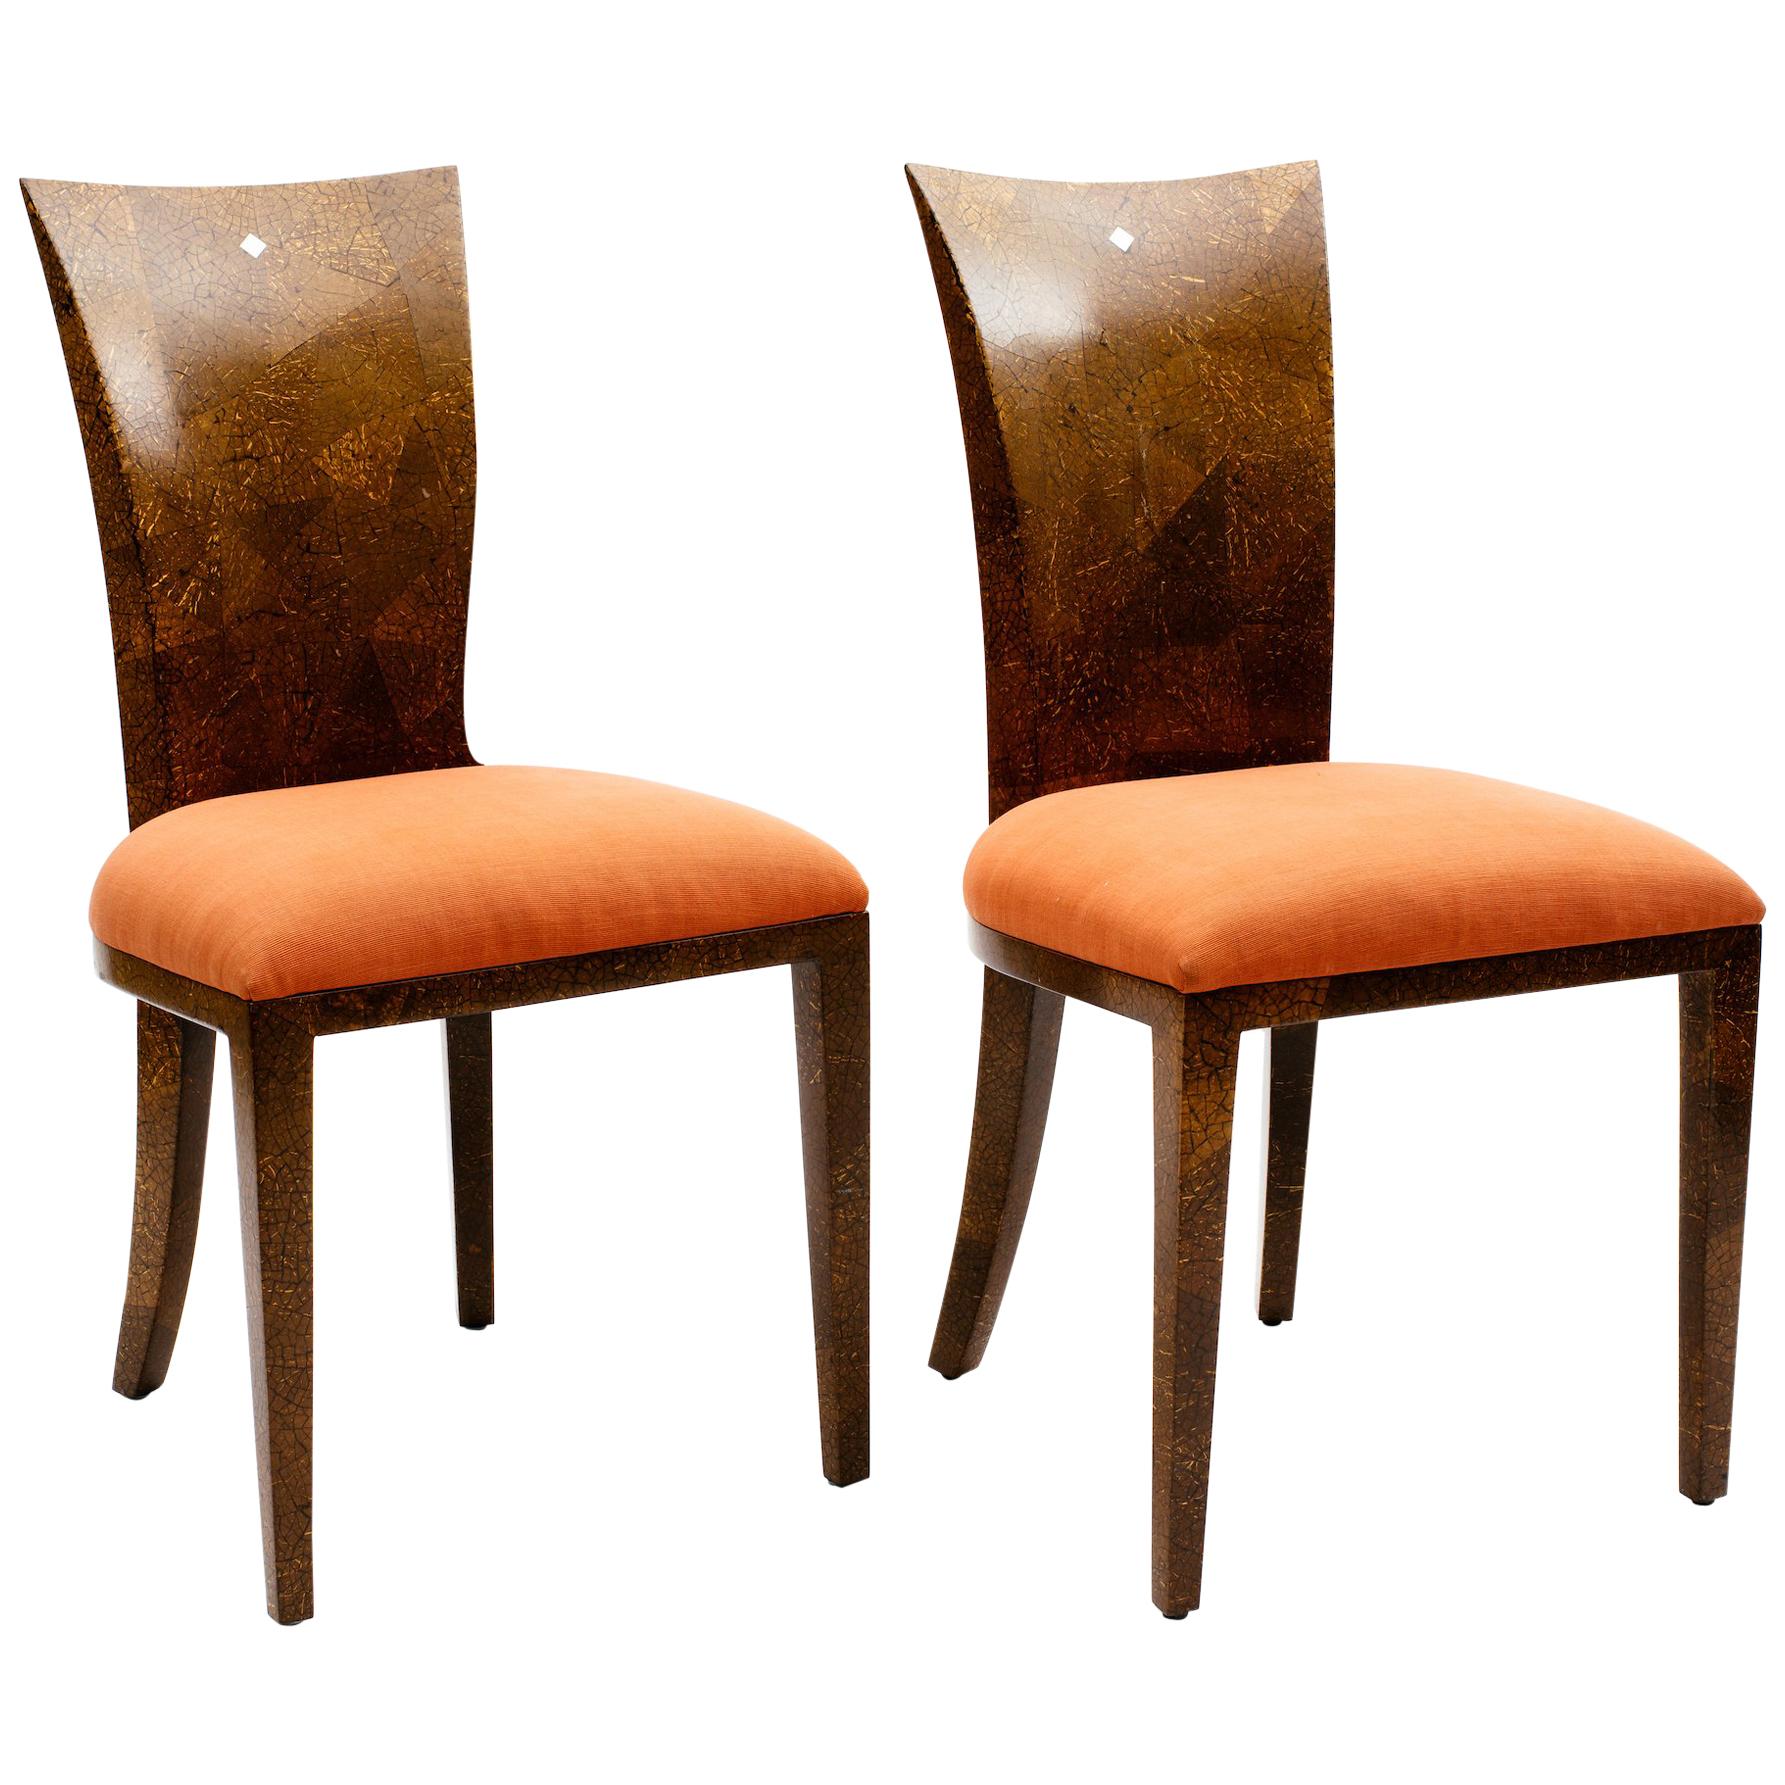 Pair of Coconut Shell Chairs with Mother of Pearl Inlay